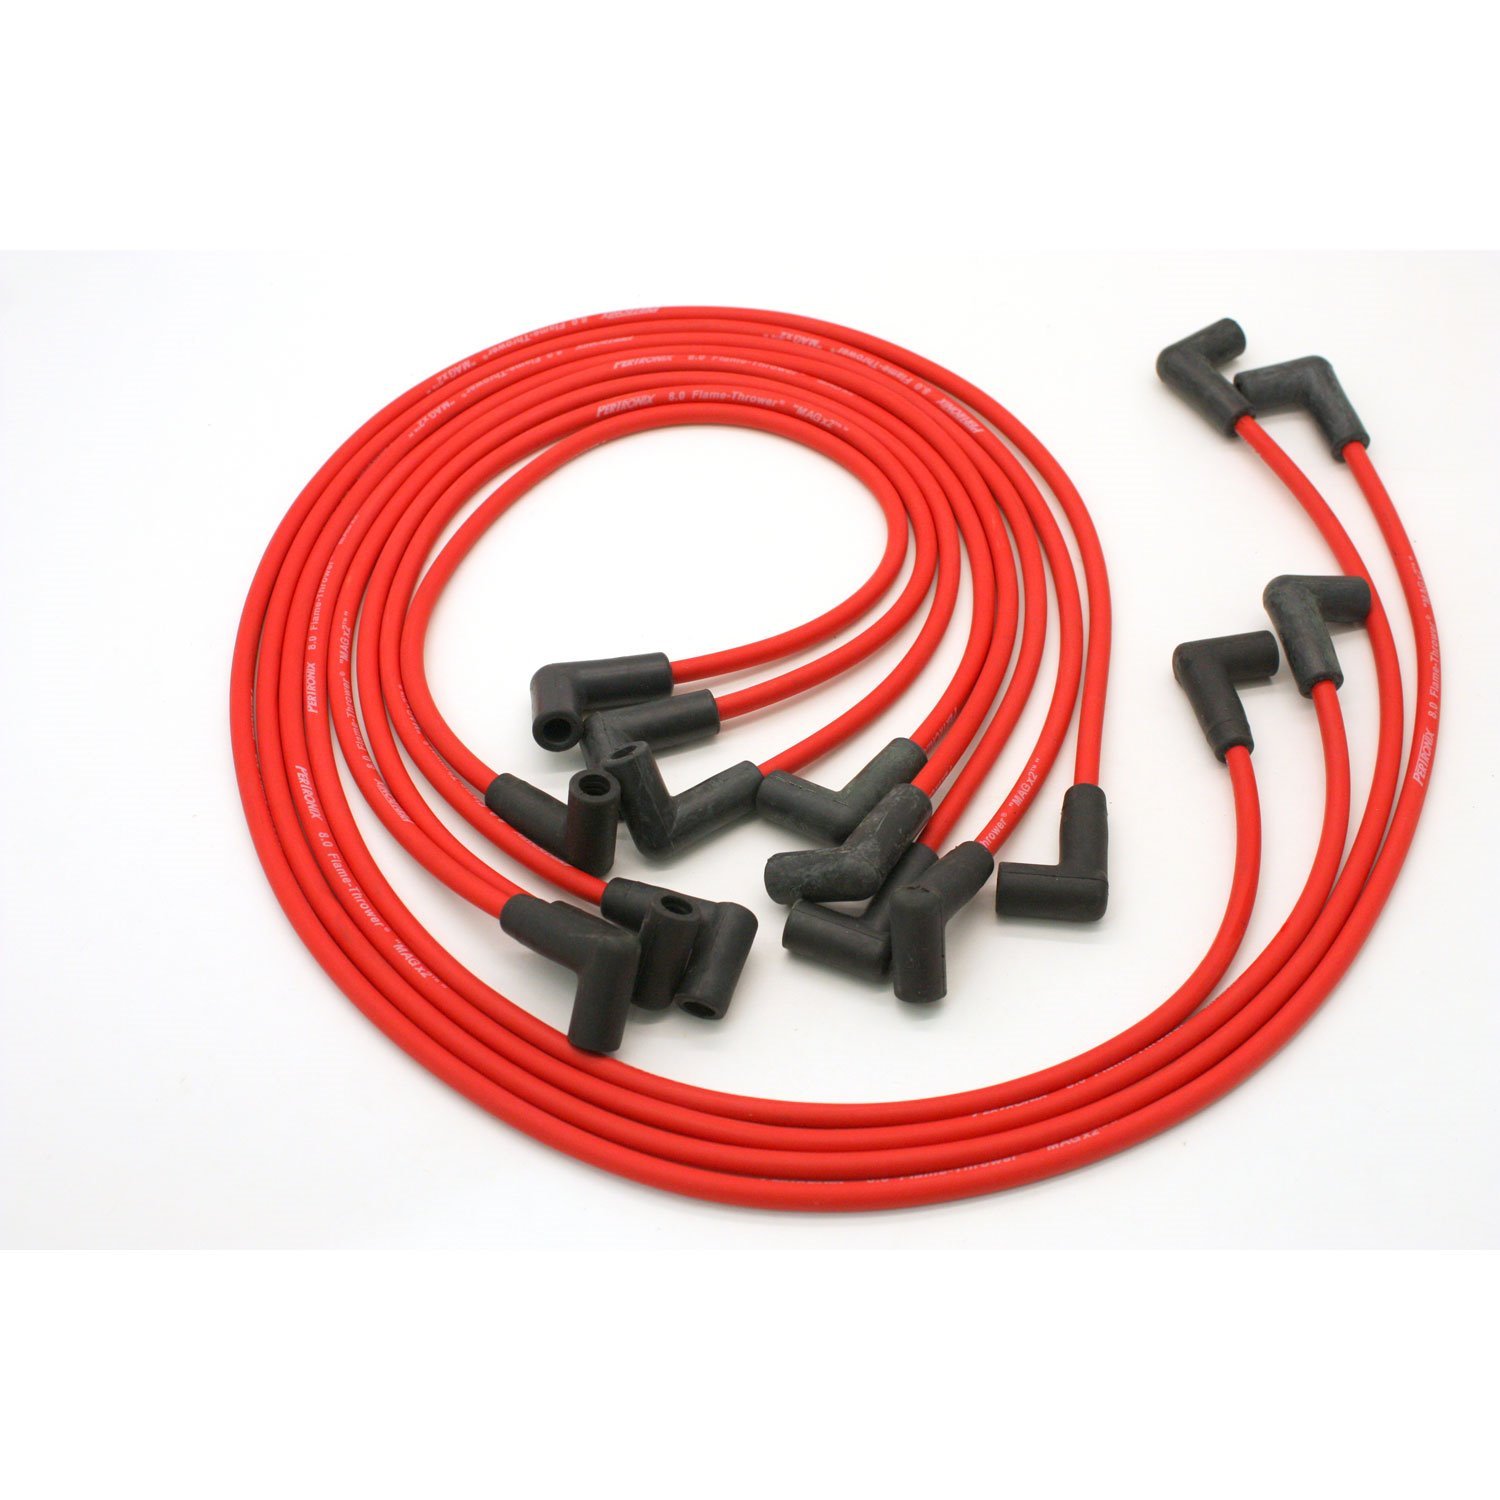 Flame-Thrower 8mm MAGx2 Spark Plug Wires 1974-82 Chevy Corvette 5.7L